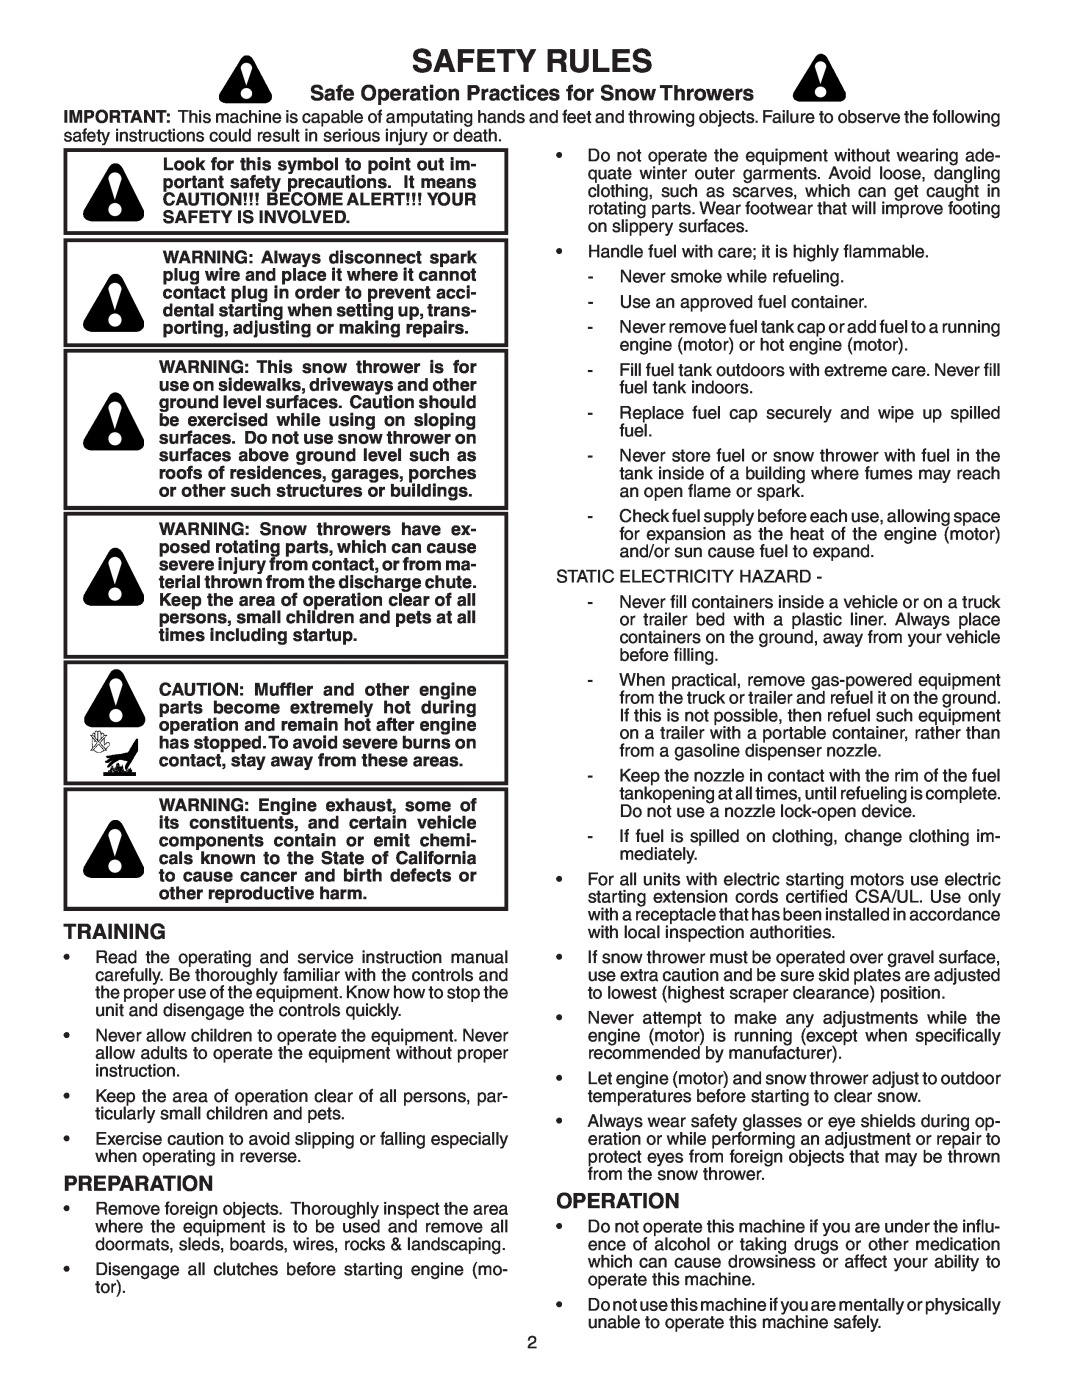 Poulan PP1130SB, 187883 owner manual Safety Rules, Safe Operation Practices for Snow Throwers, Training, Preparation 